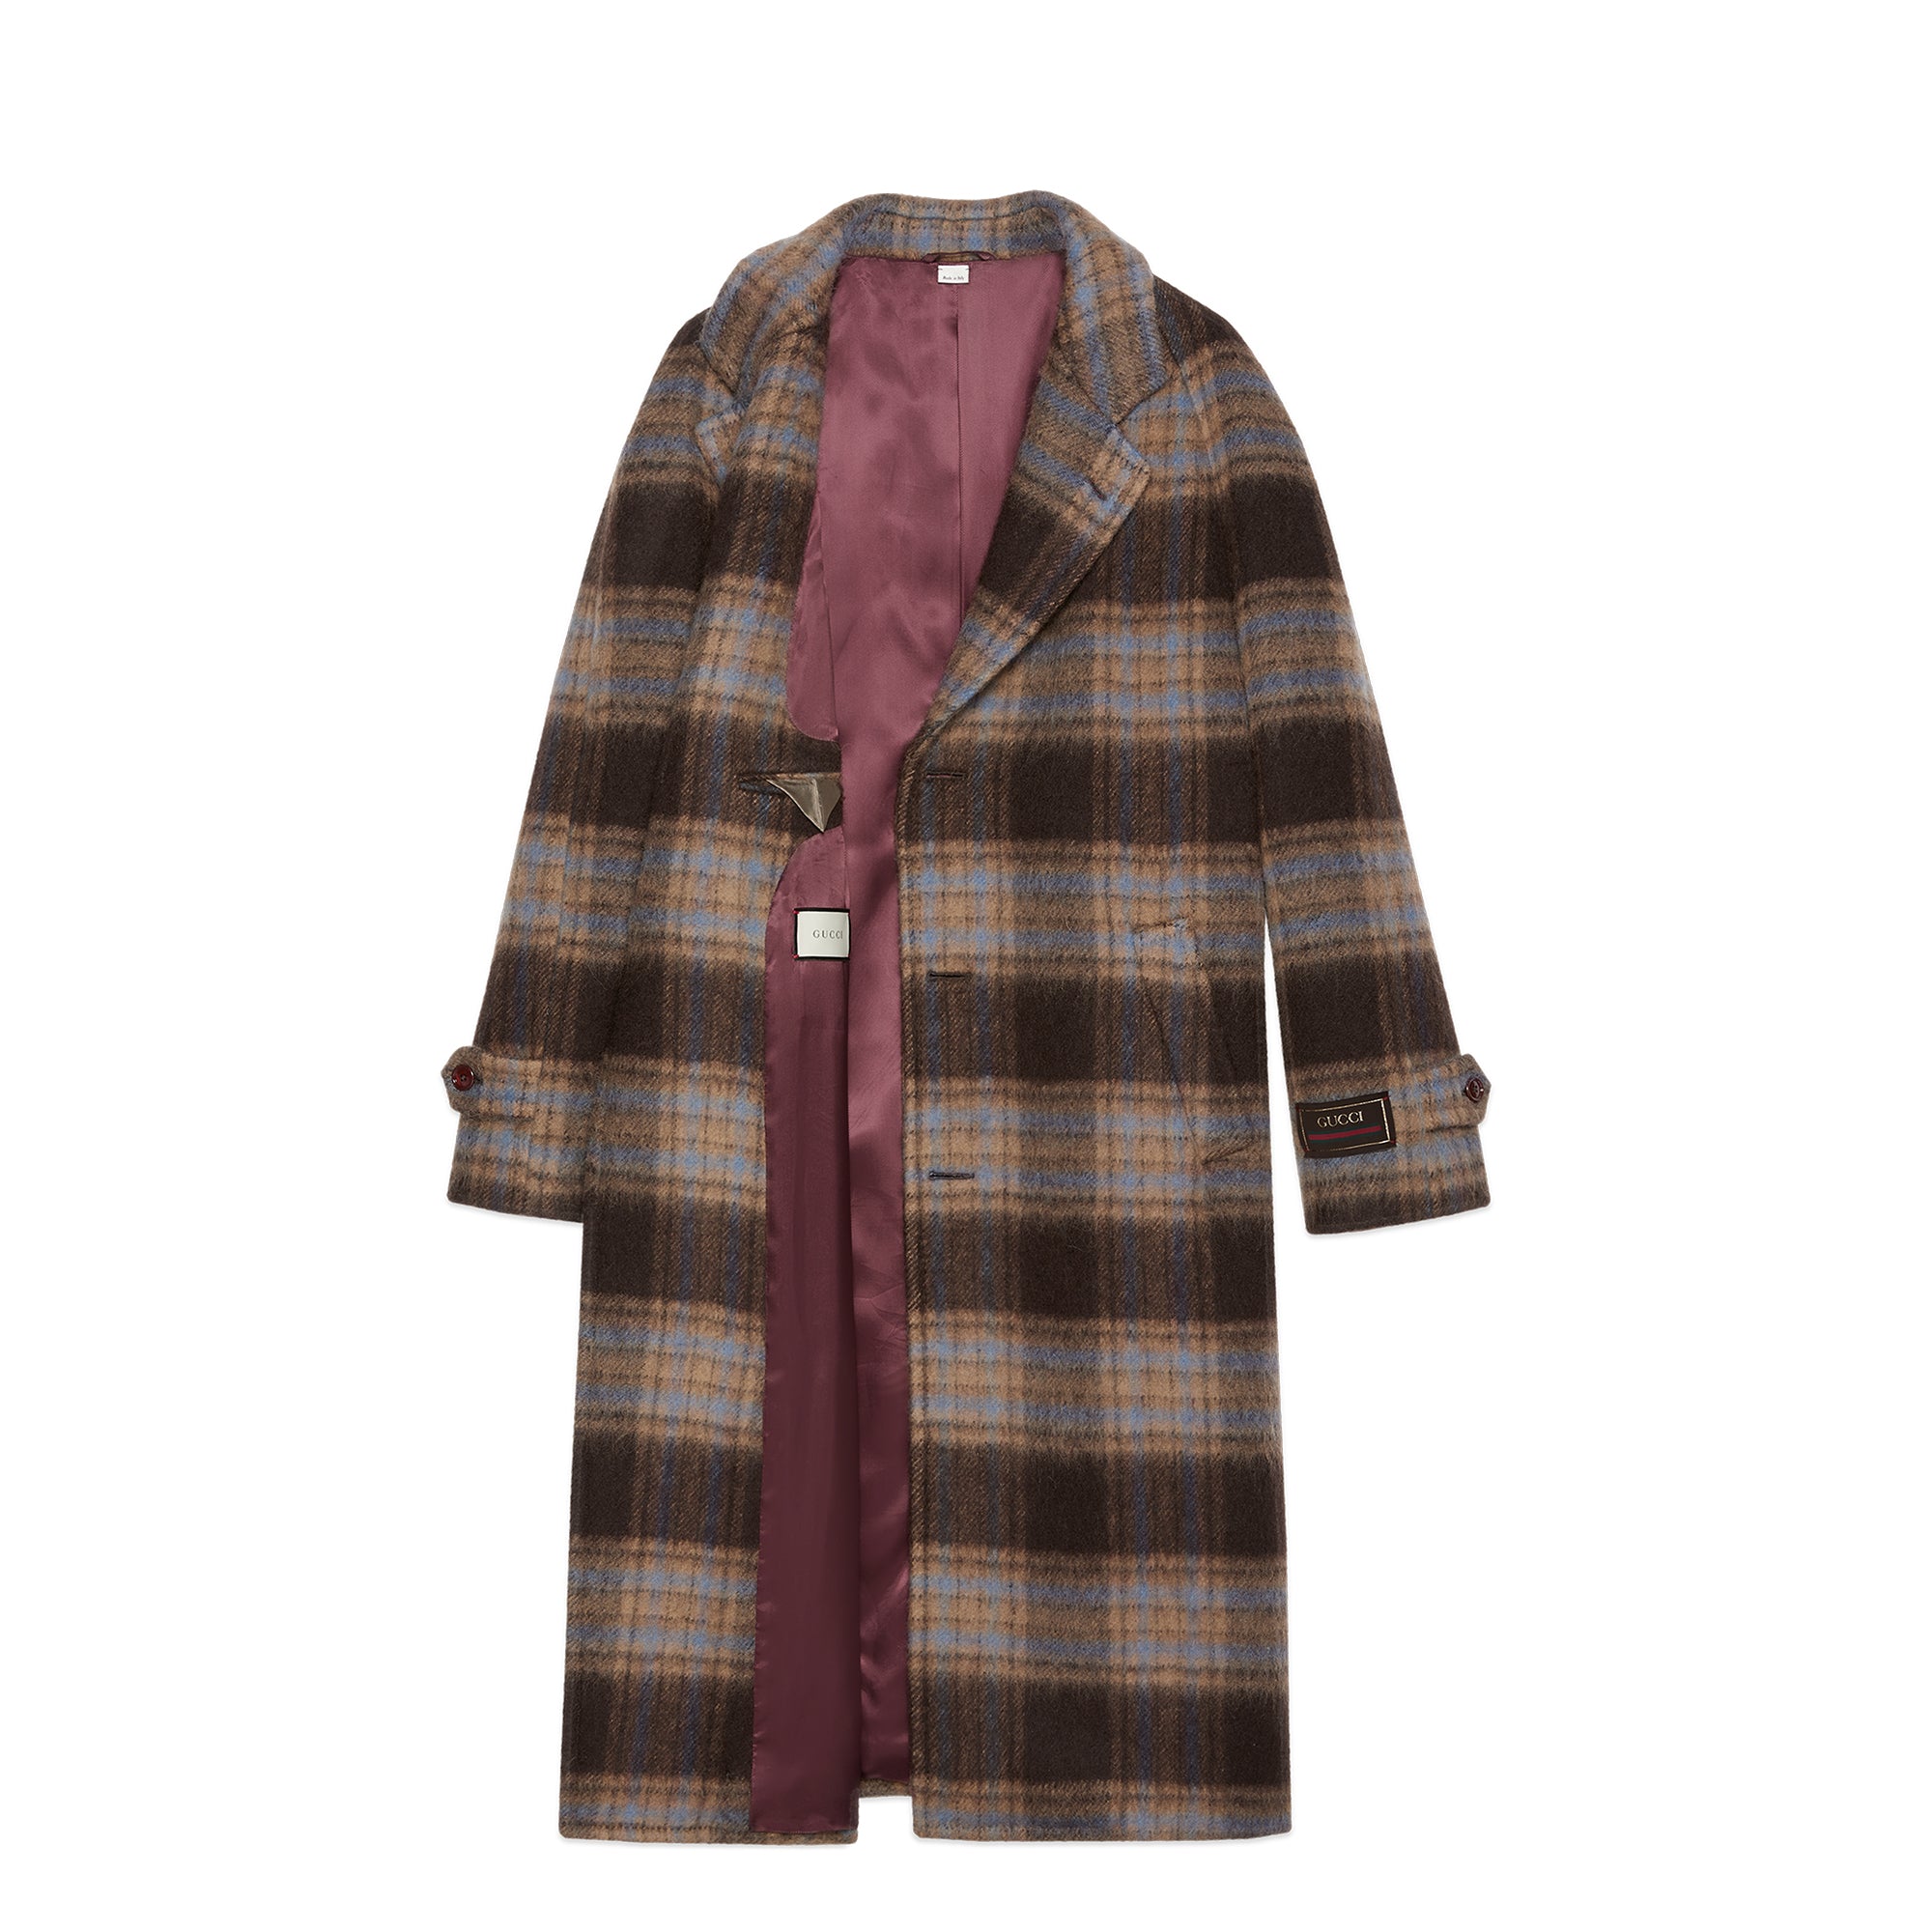 Gucci - Men’s Check Wool Coat With Gucci - Label - (Brown/Beige) view 2